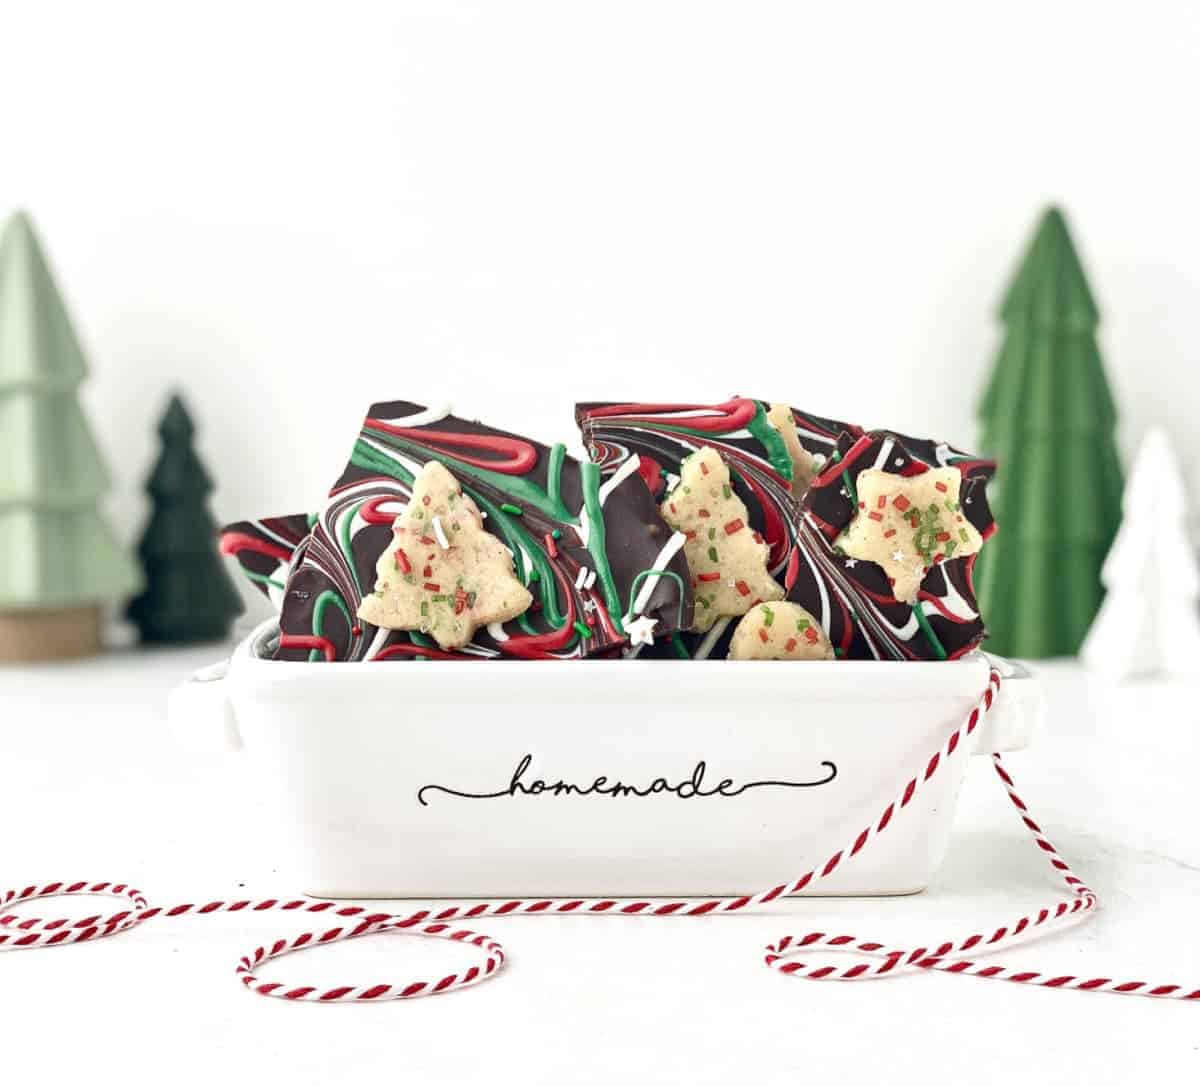 Sugar Cookie Dough Bark in a ceramic tray with Christmas trees in the background